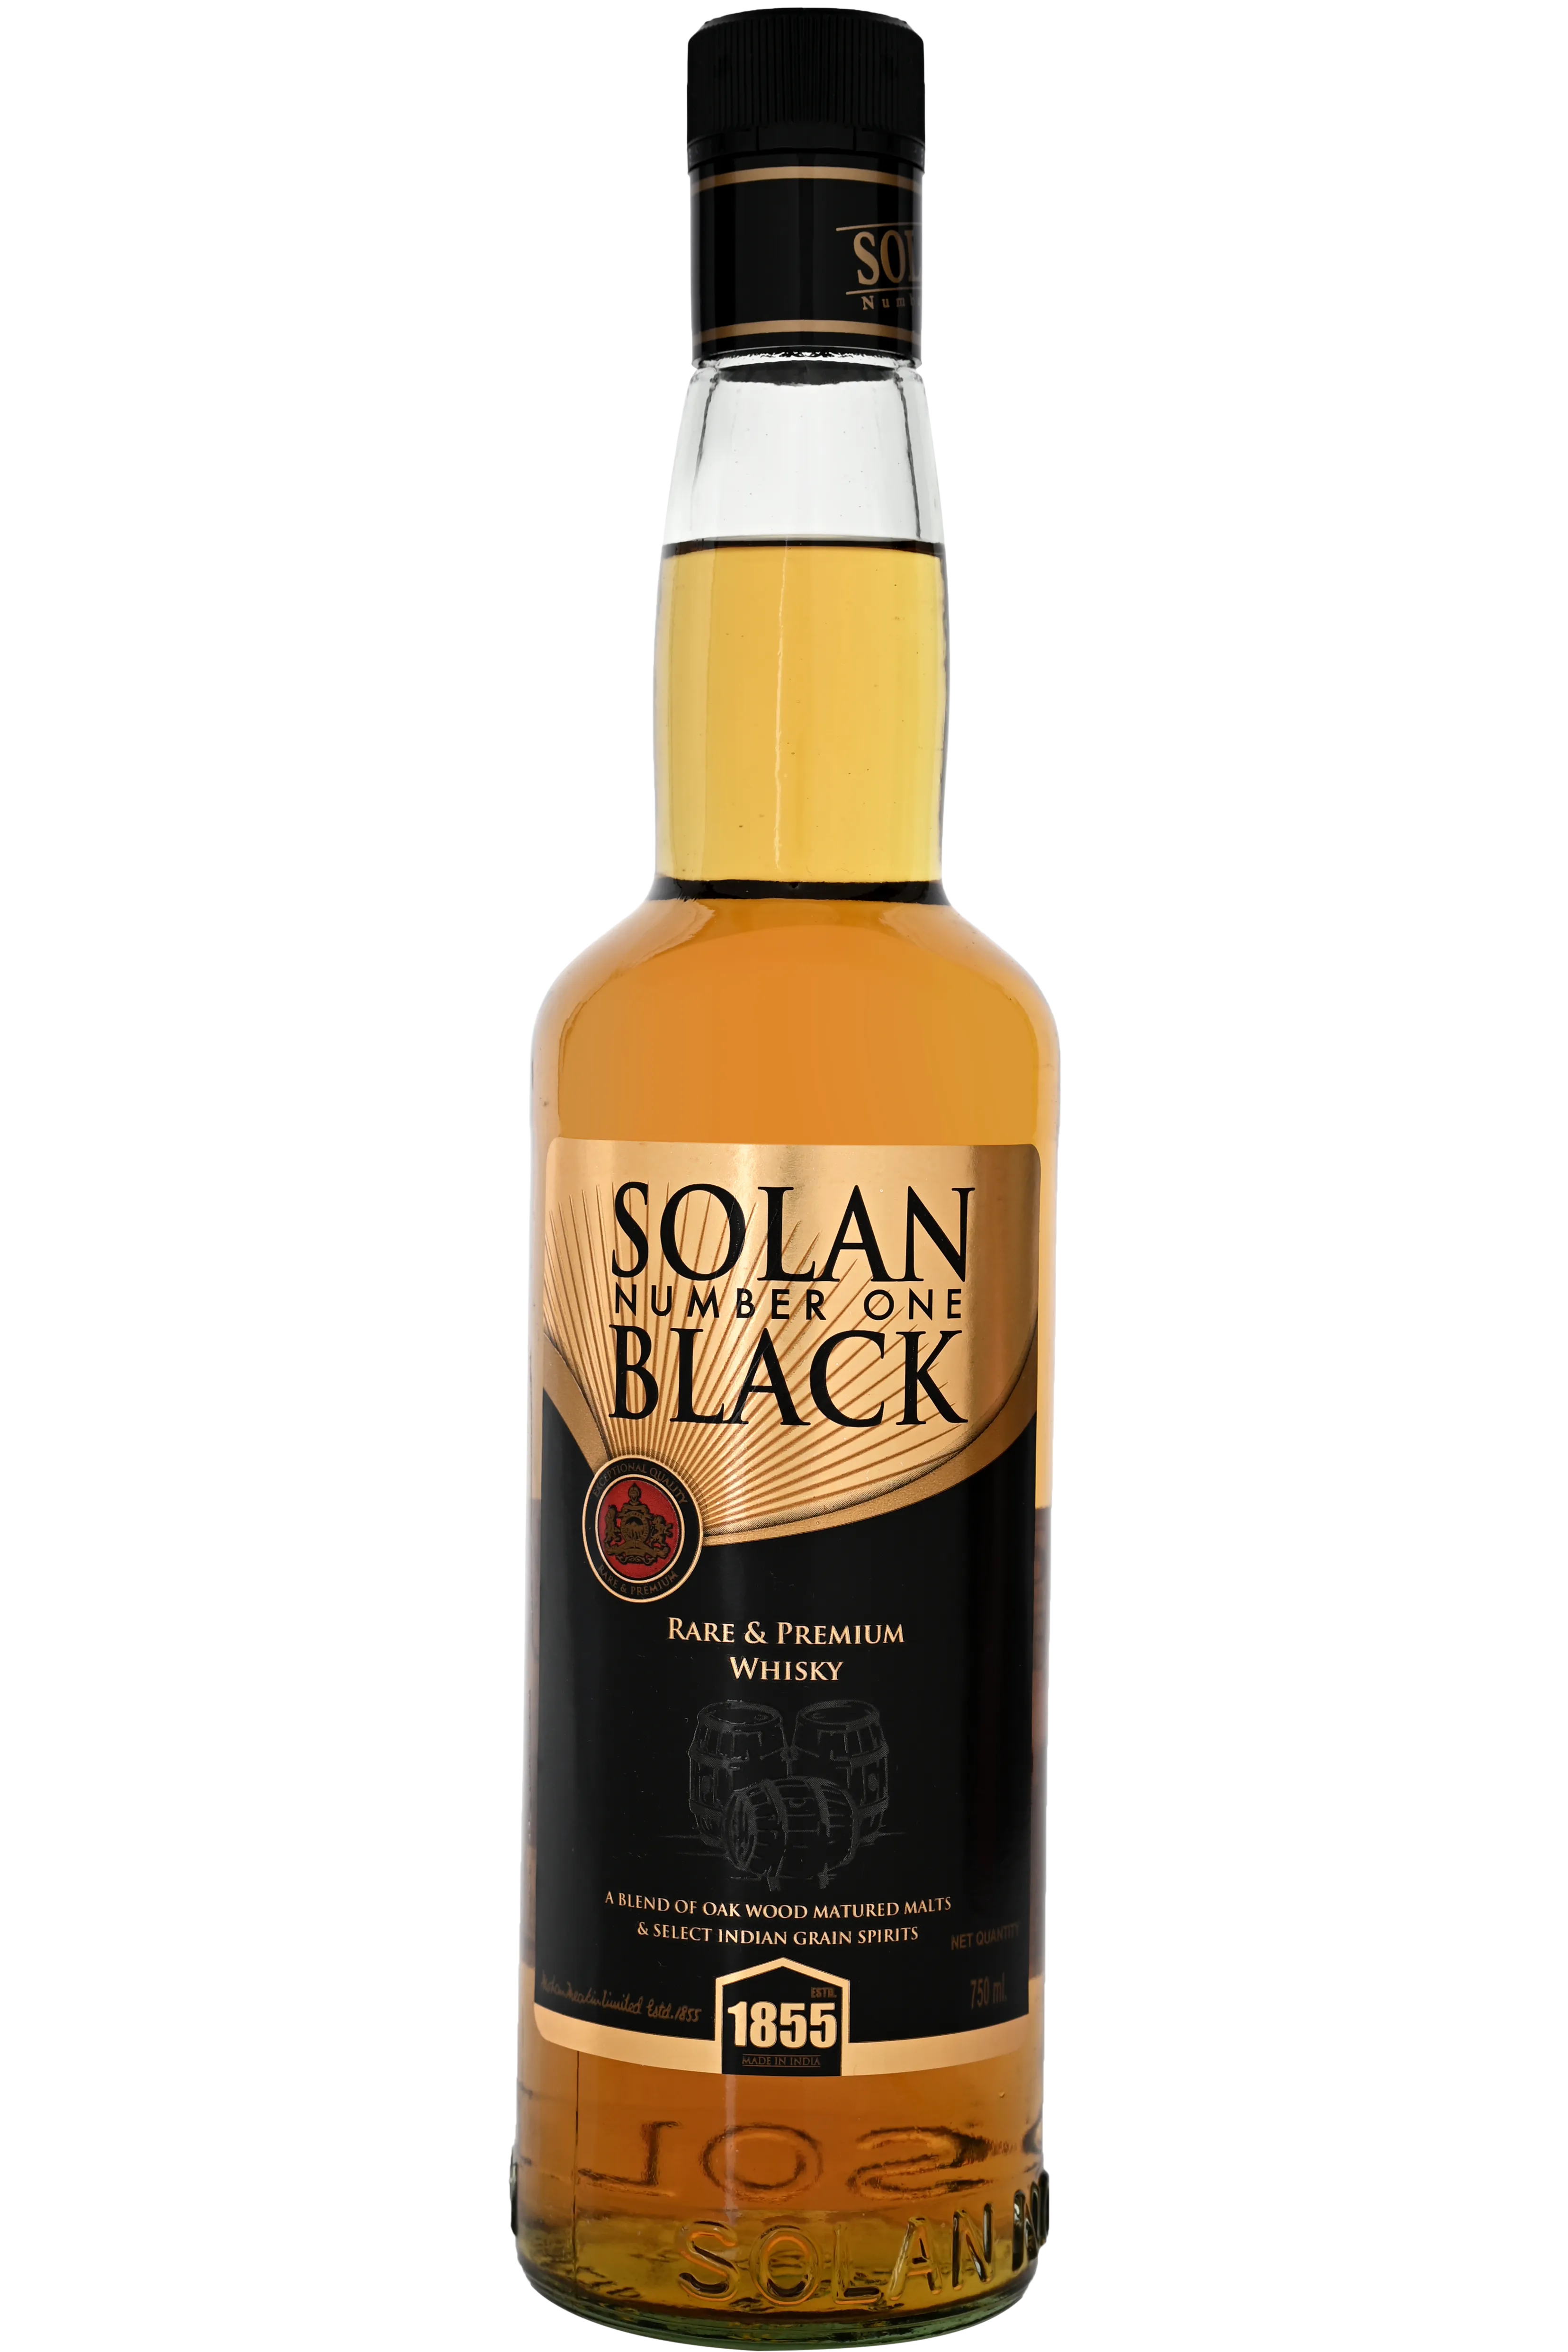 https://sipdirect-prod.s3.amazonaws.com/images/Category-Images2/Whiskey/Others/Solan-Number-One-Black-Premium-Whisky-750mL_front.webp